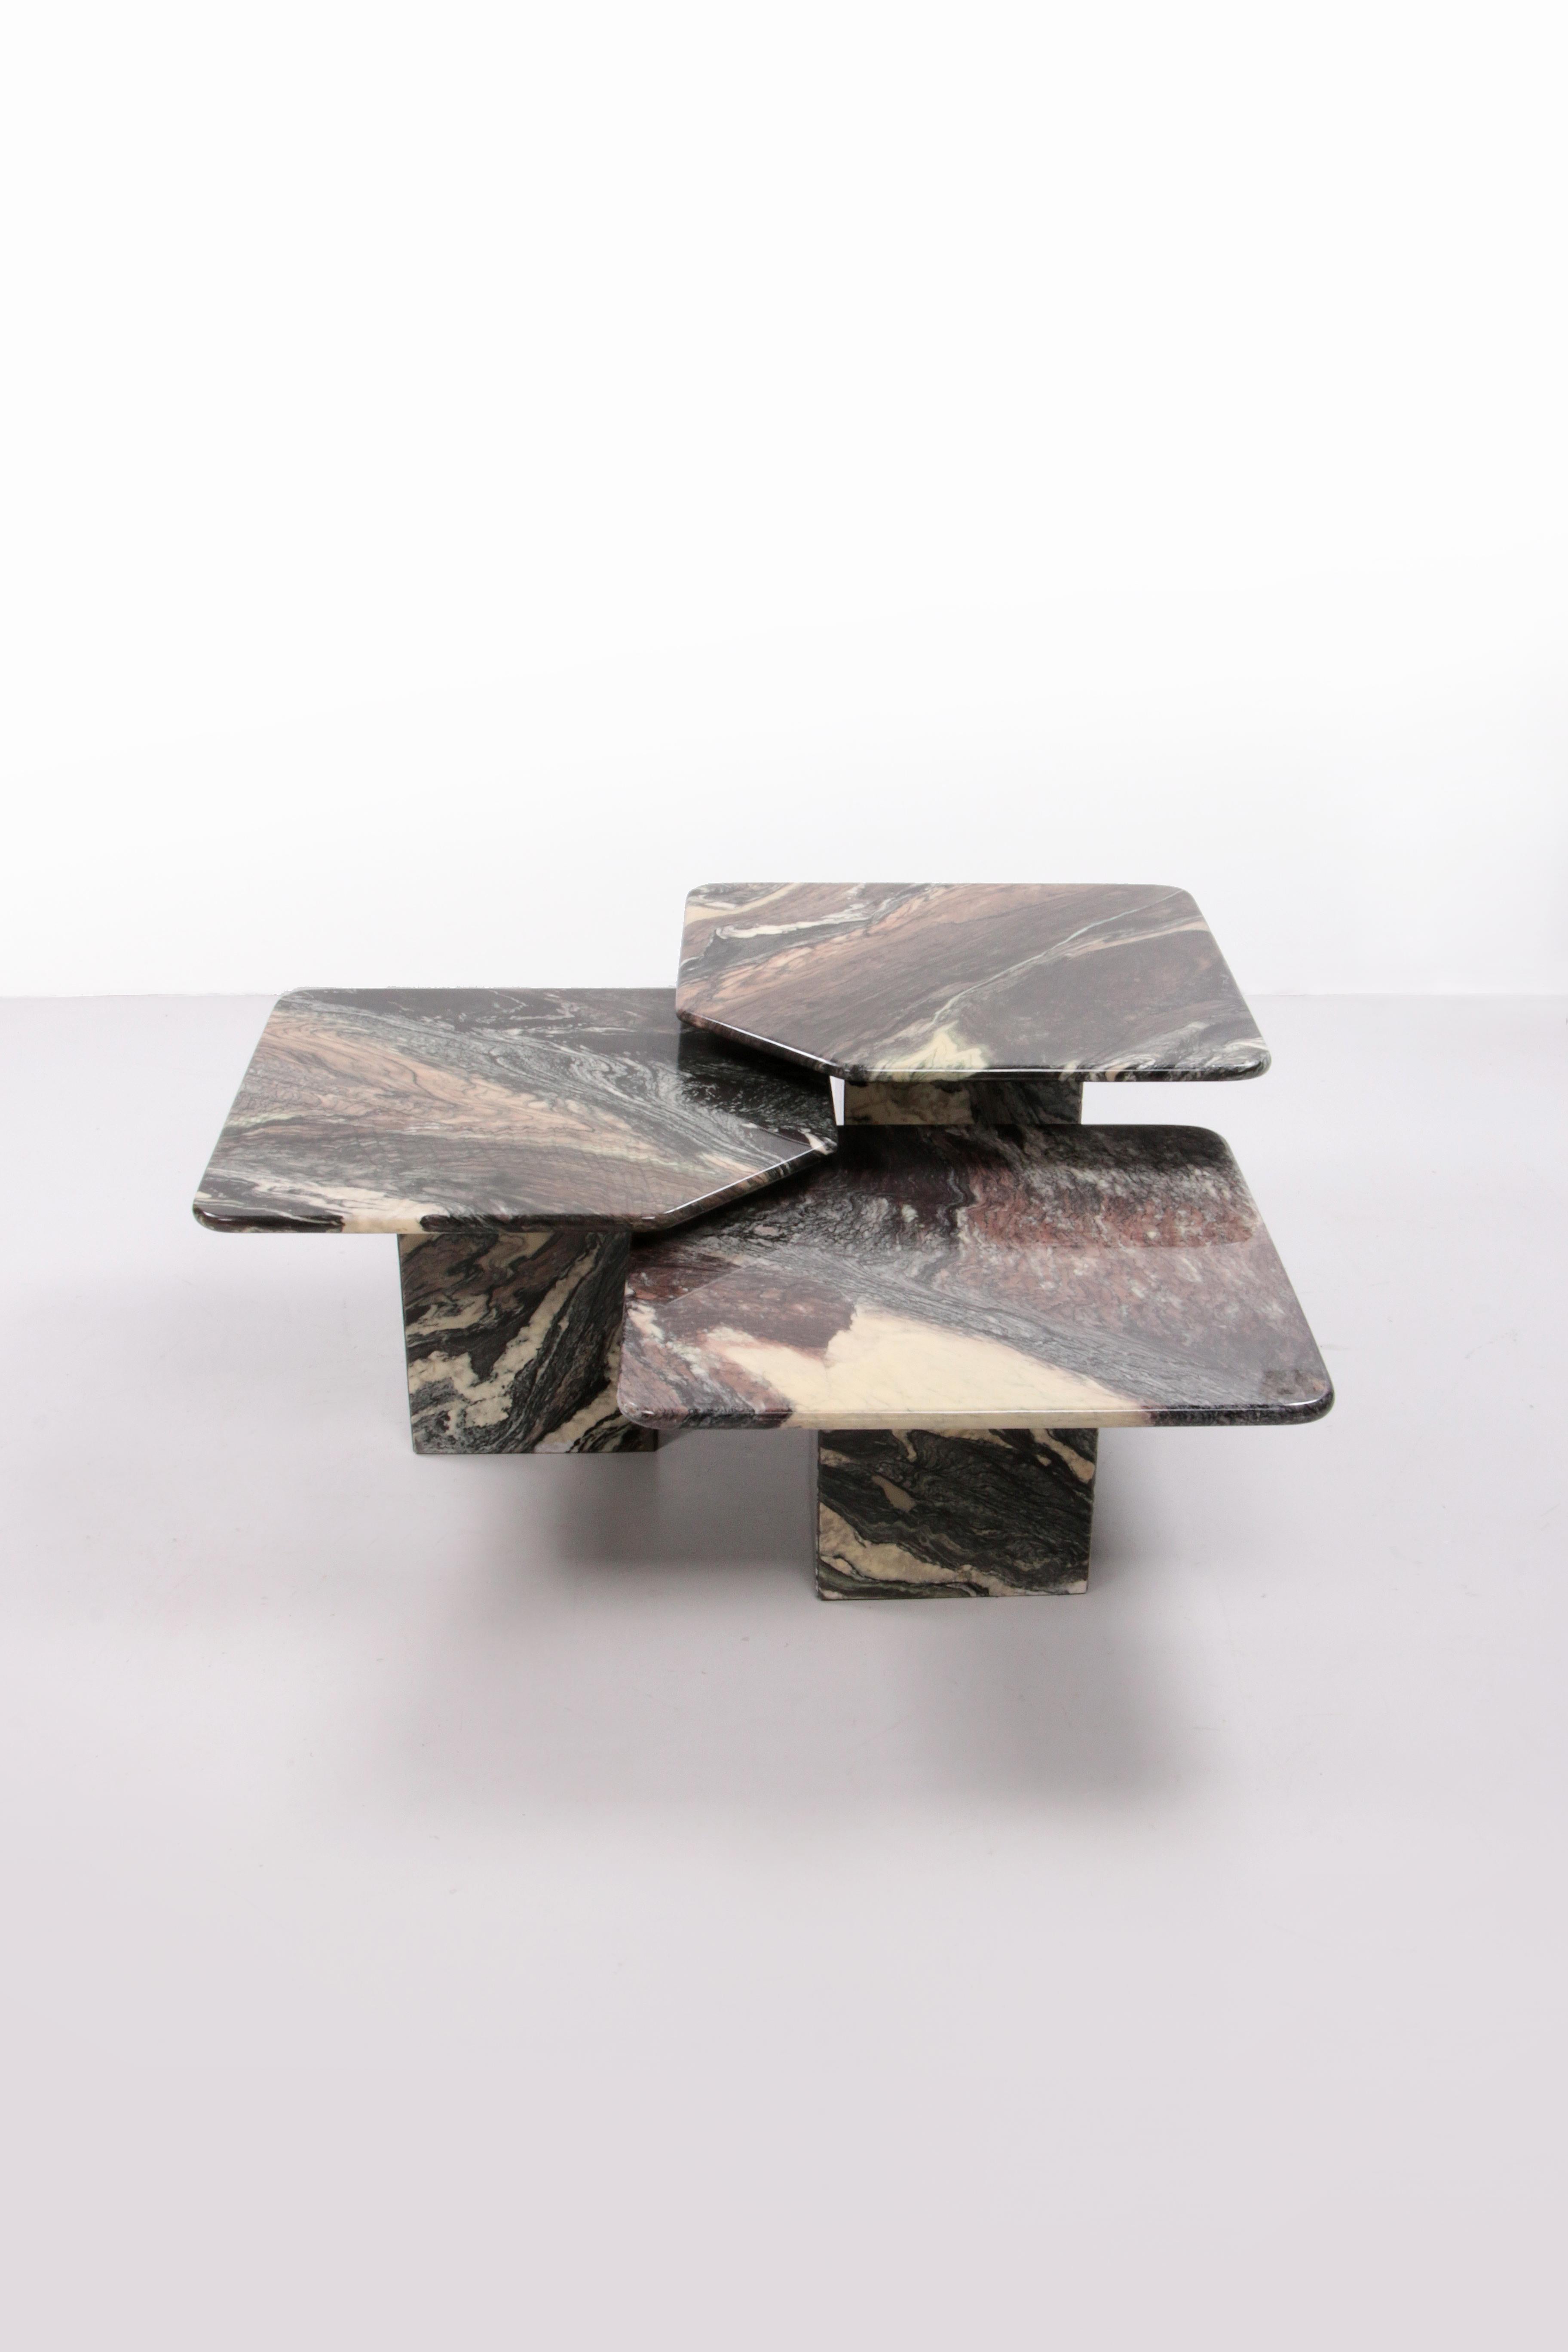 Italian Set of 3 Marble side tables handmade, 1970


Italian design set of three coffee or side tables in Italian black anthracite and cream mixed marble, handmade by craftsmen. A minimalist piece of furniture that can take any modern living room to